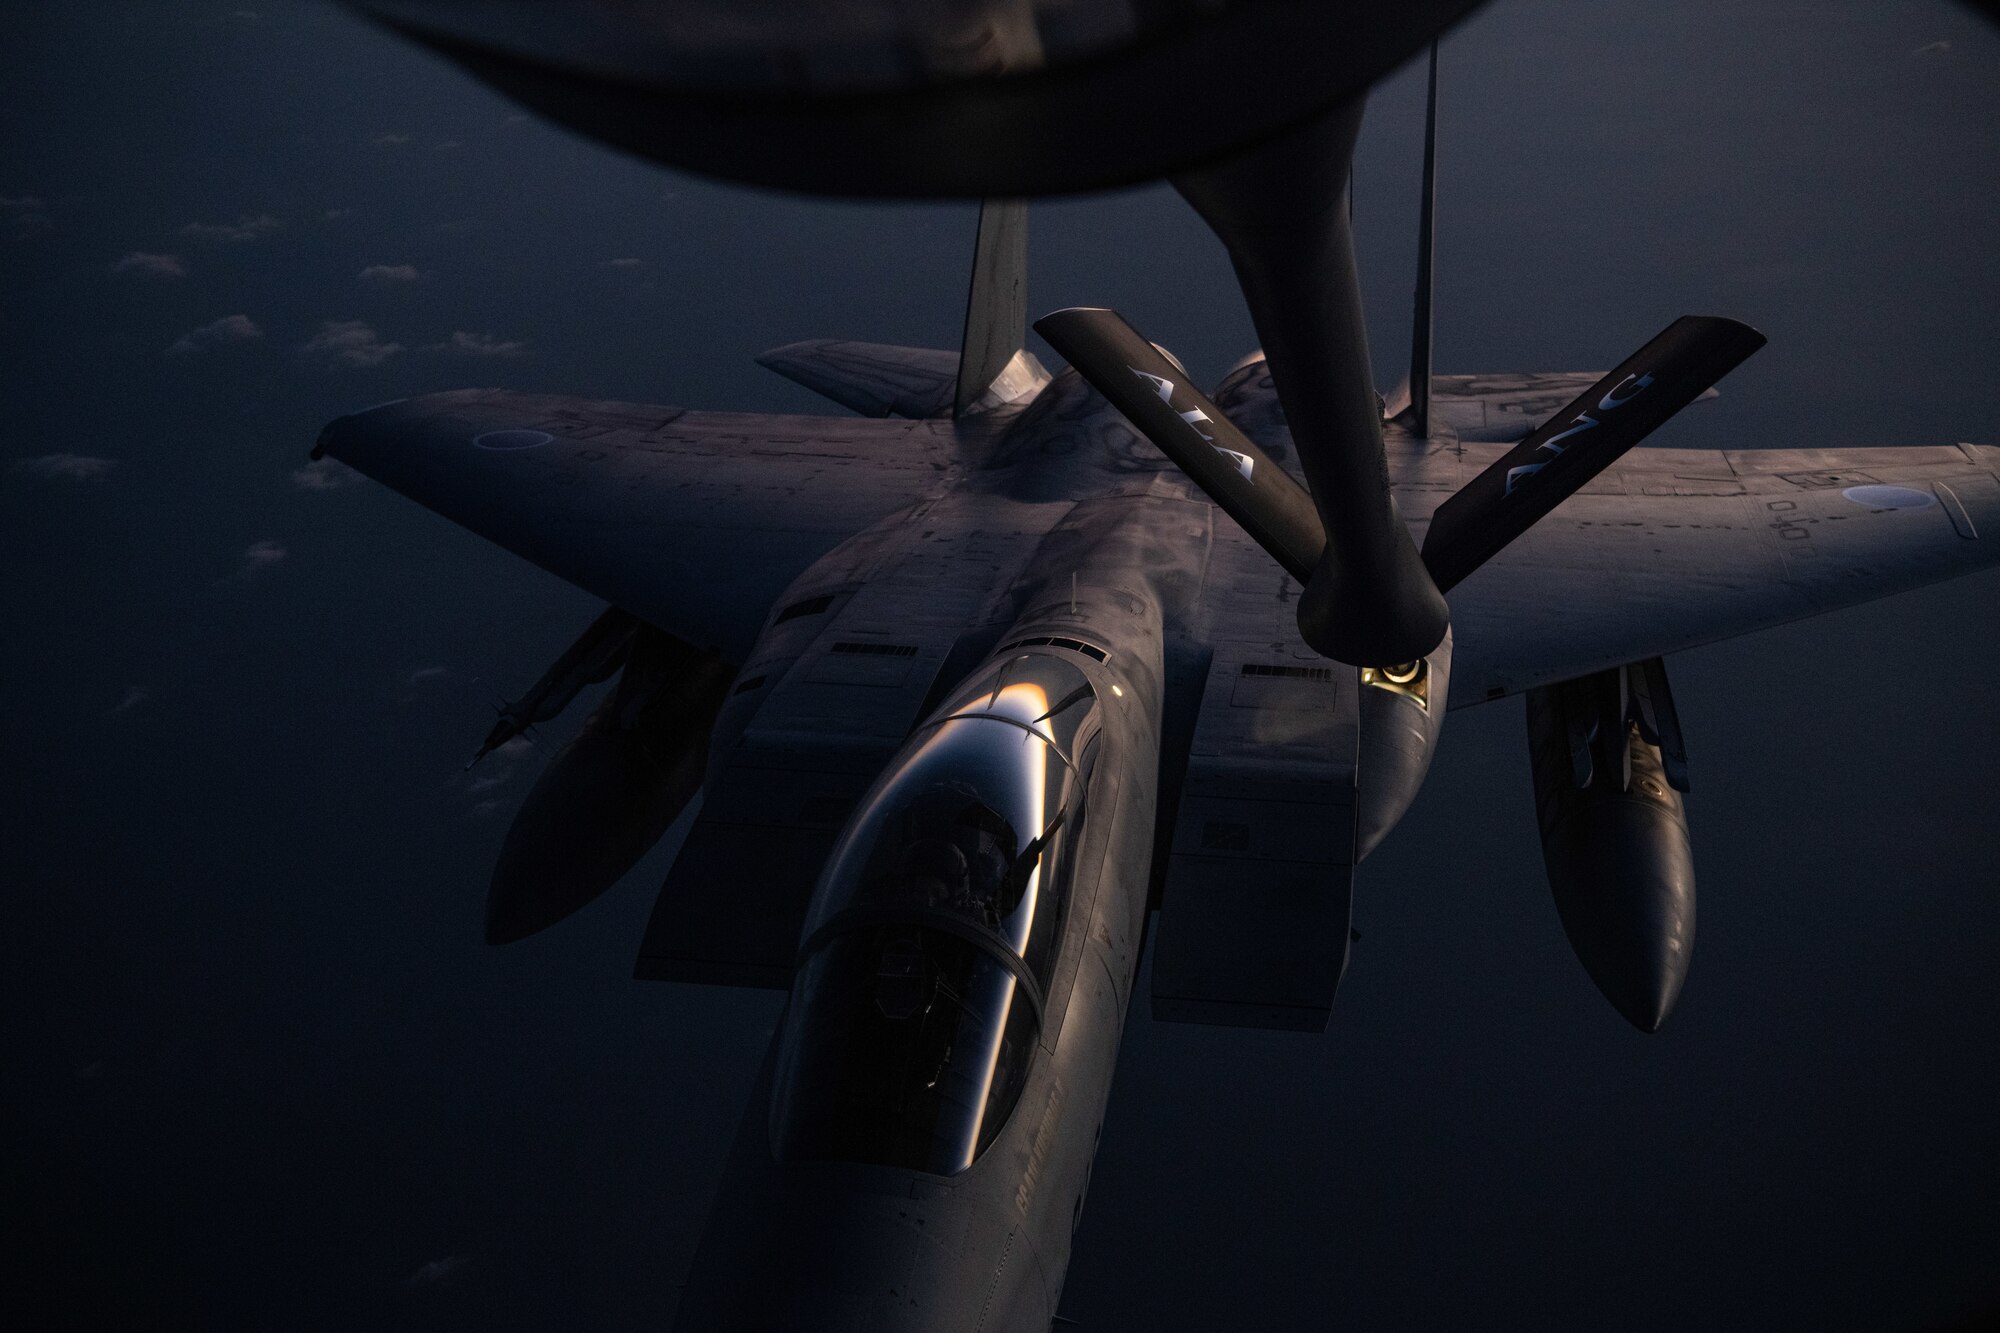 A U.S. Air Force KC-135 Stratotanker from the 909th Air Refueling Squadron refuels a Japan Air Self-Defense Force F-15J Eagle over the Pacific Ocean during Exercise Southern Beach, Oct. 28, 2021. Bilateral training exercises like Southern Beach help build trusting relationships among foreign and domestic forces, ensuring allies are able to come together to effectively respond to demanding scenarios and execute high-end missions in defense of a free and open Indo-Pacific region. (U.S. Air Force photo by Staff Sgt. Savannah L. Waters)